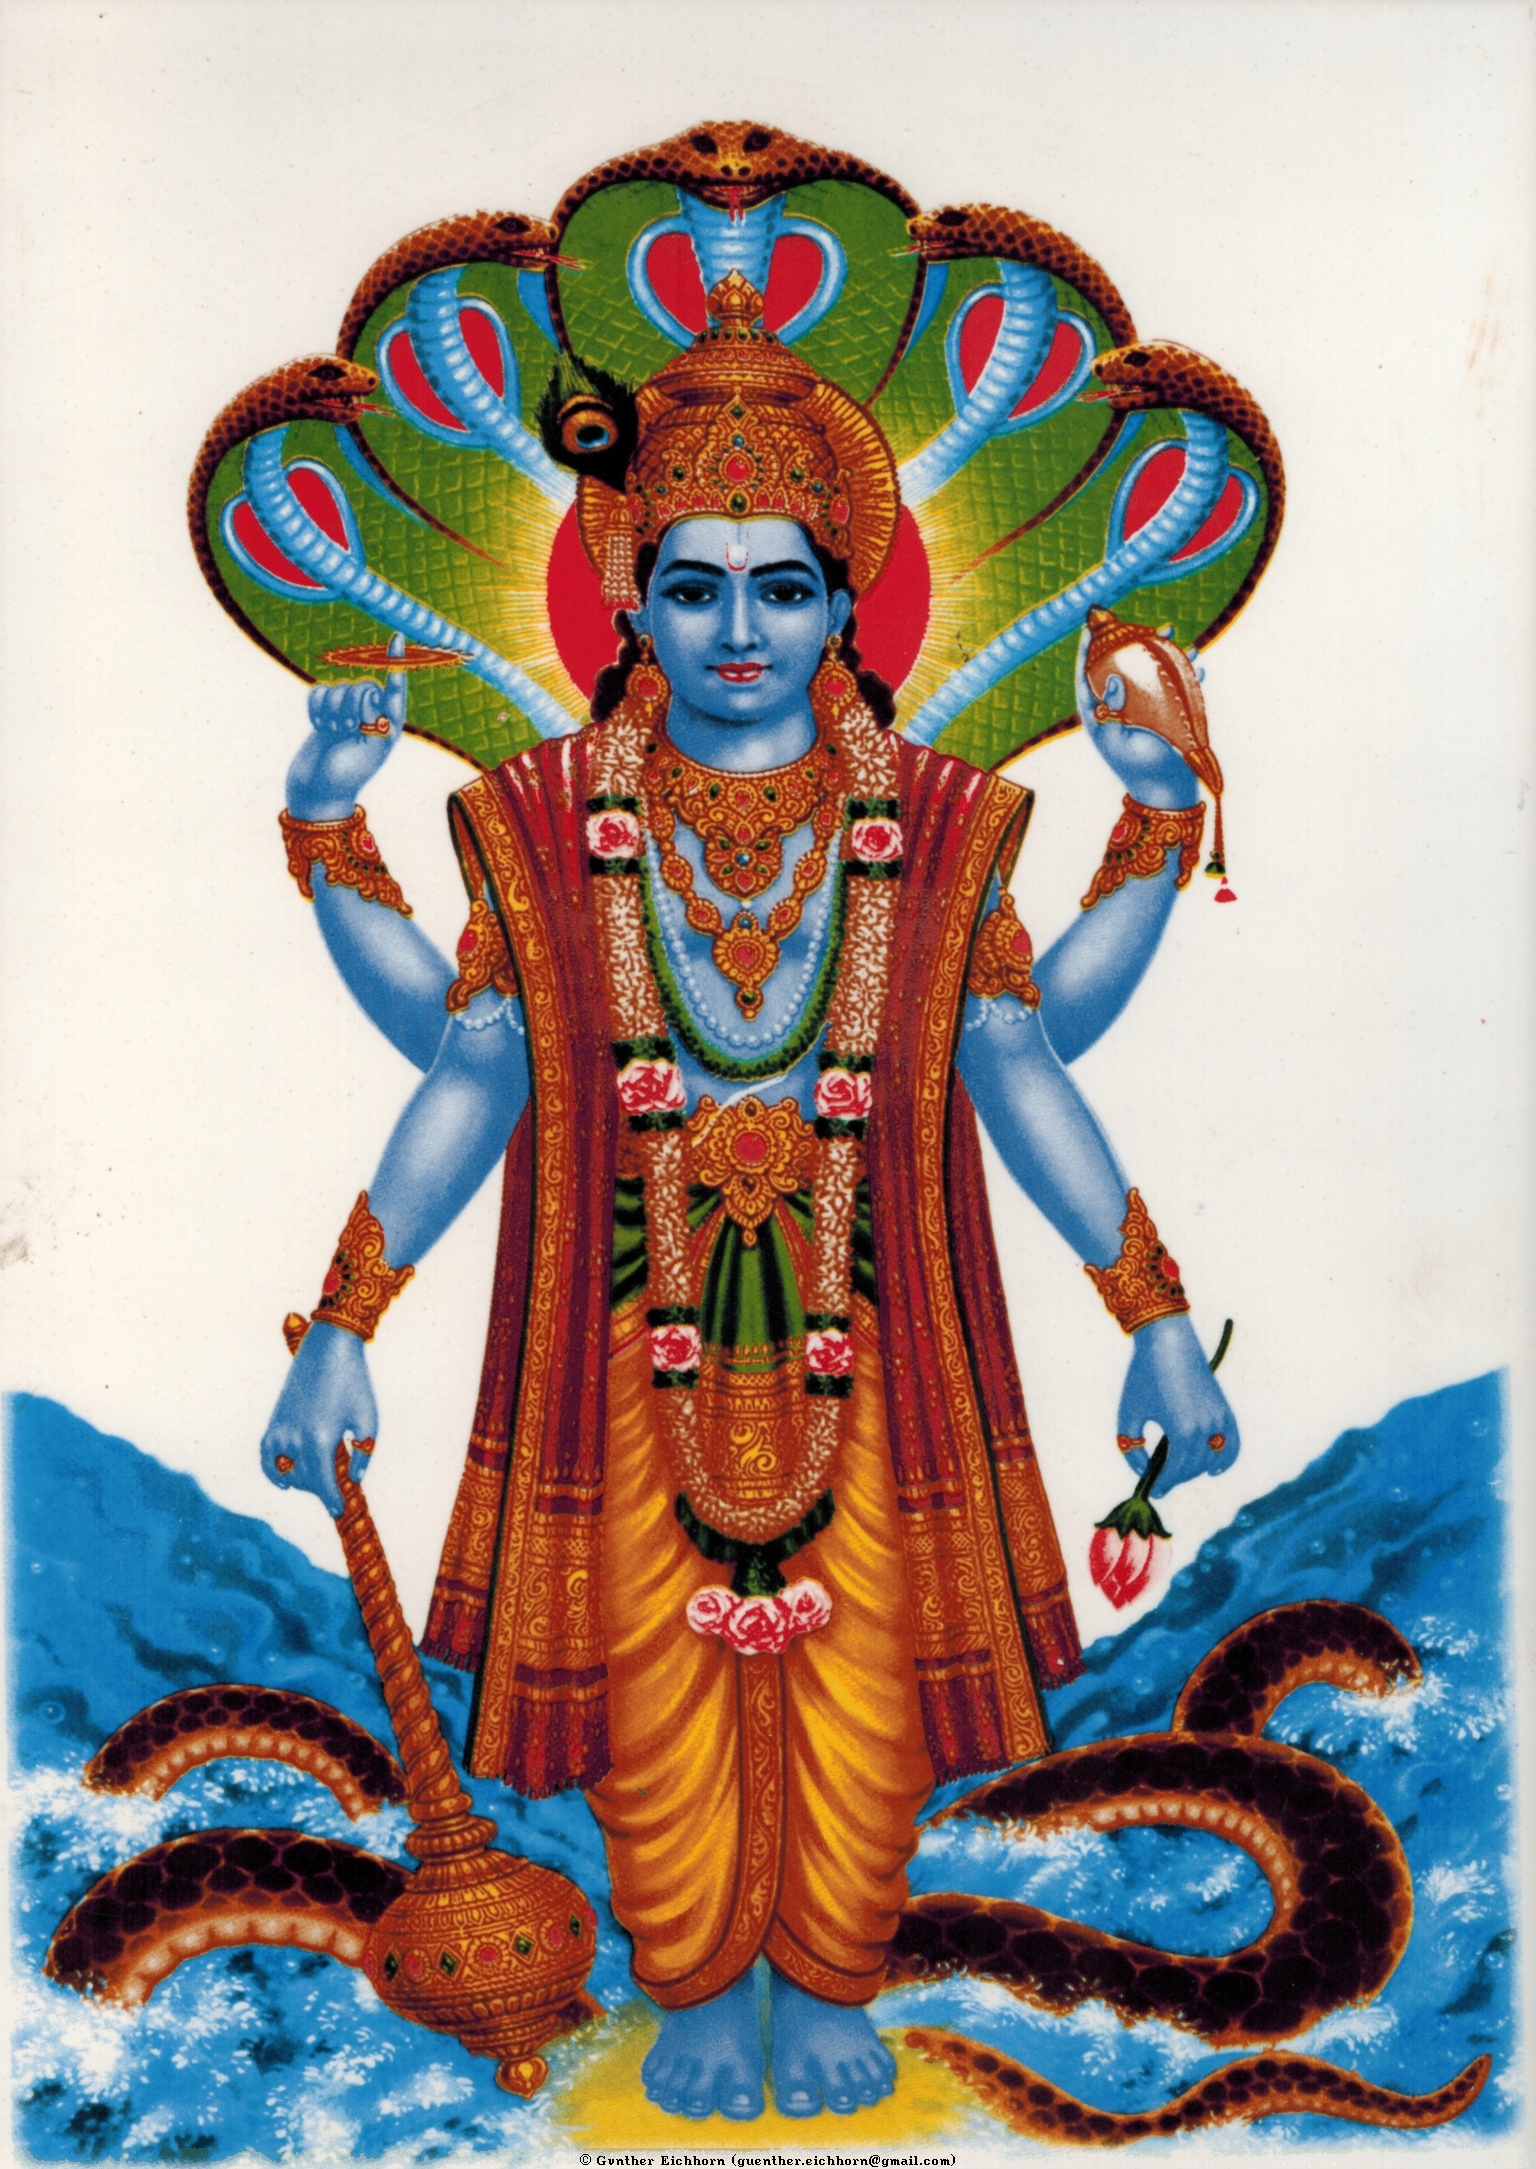 Why is Lord Vishnu always depicted with a garland? - Quora